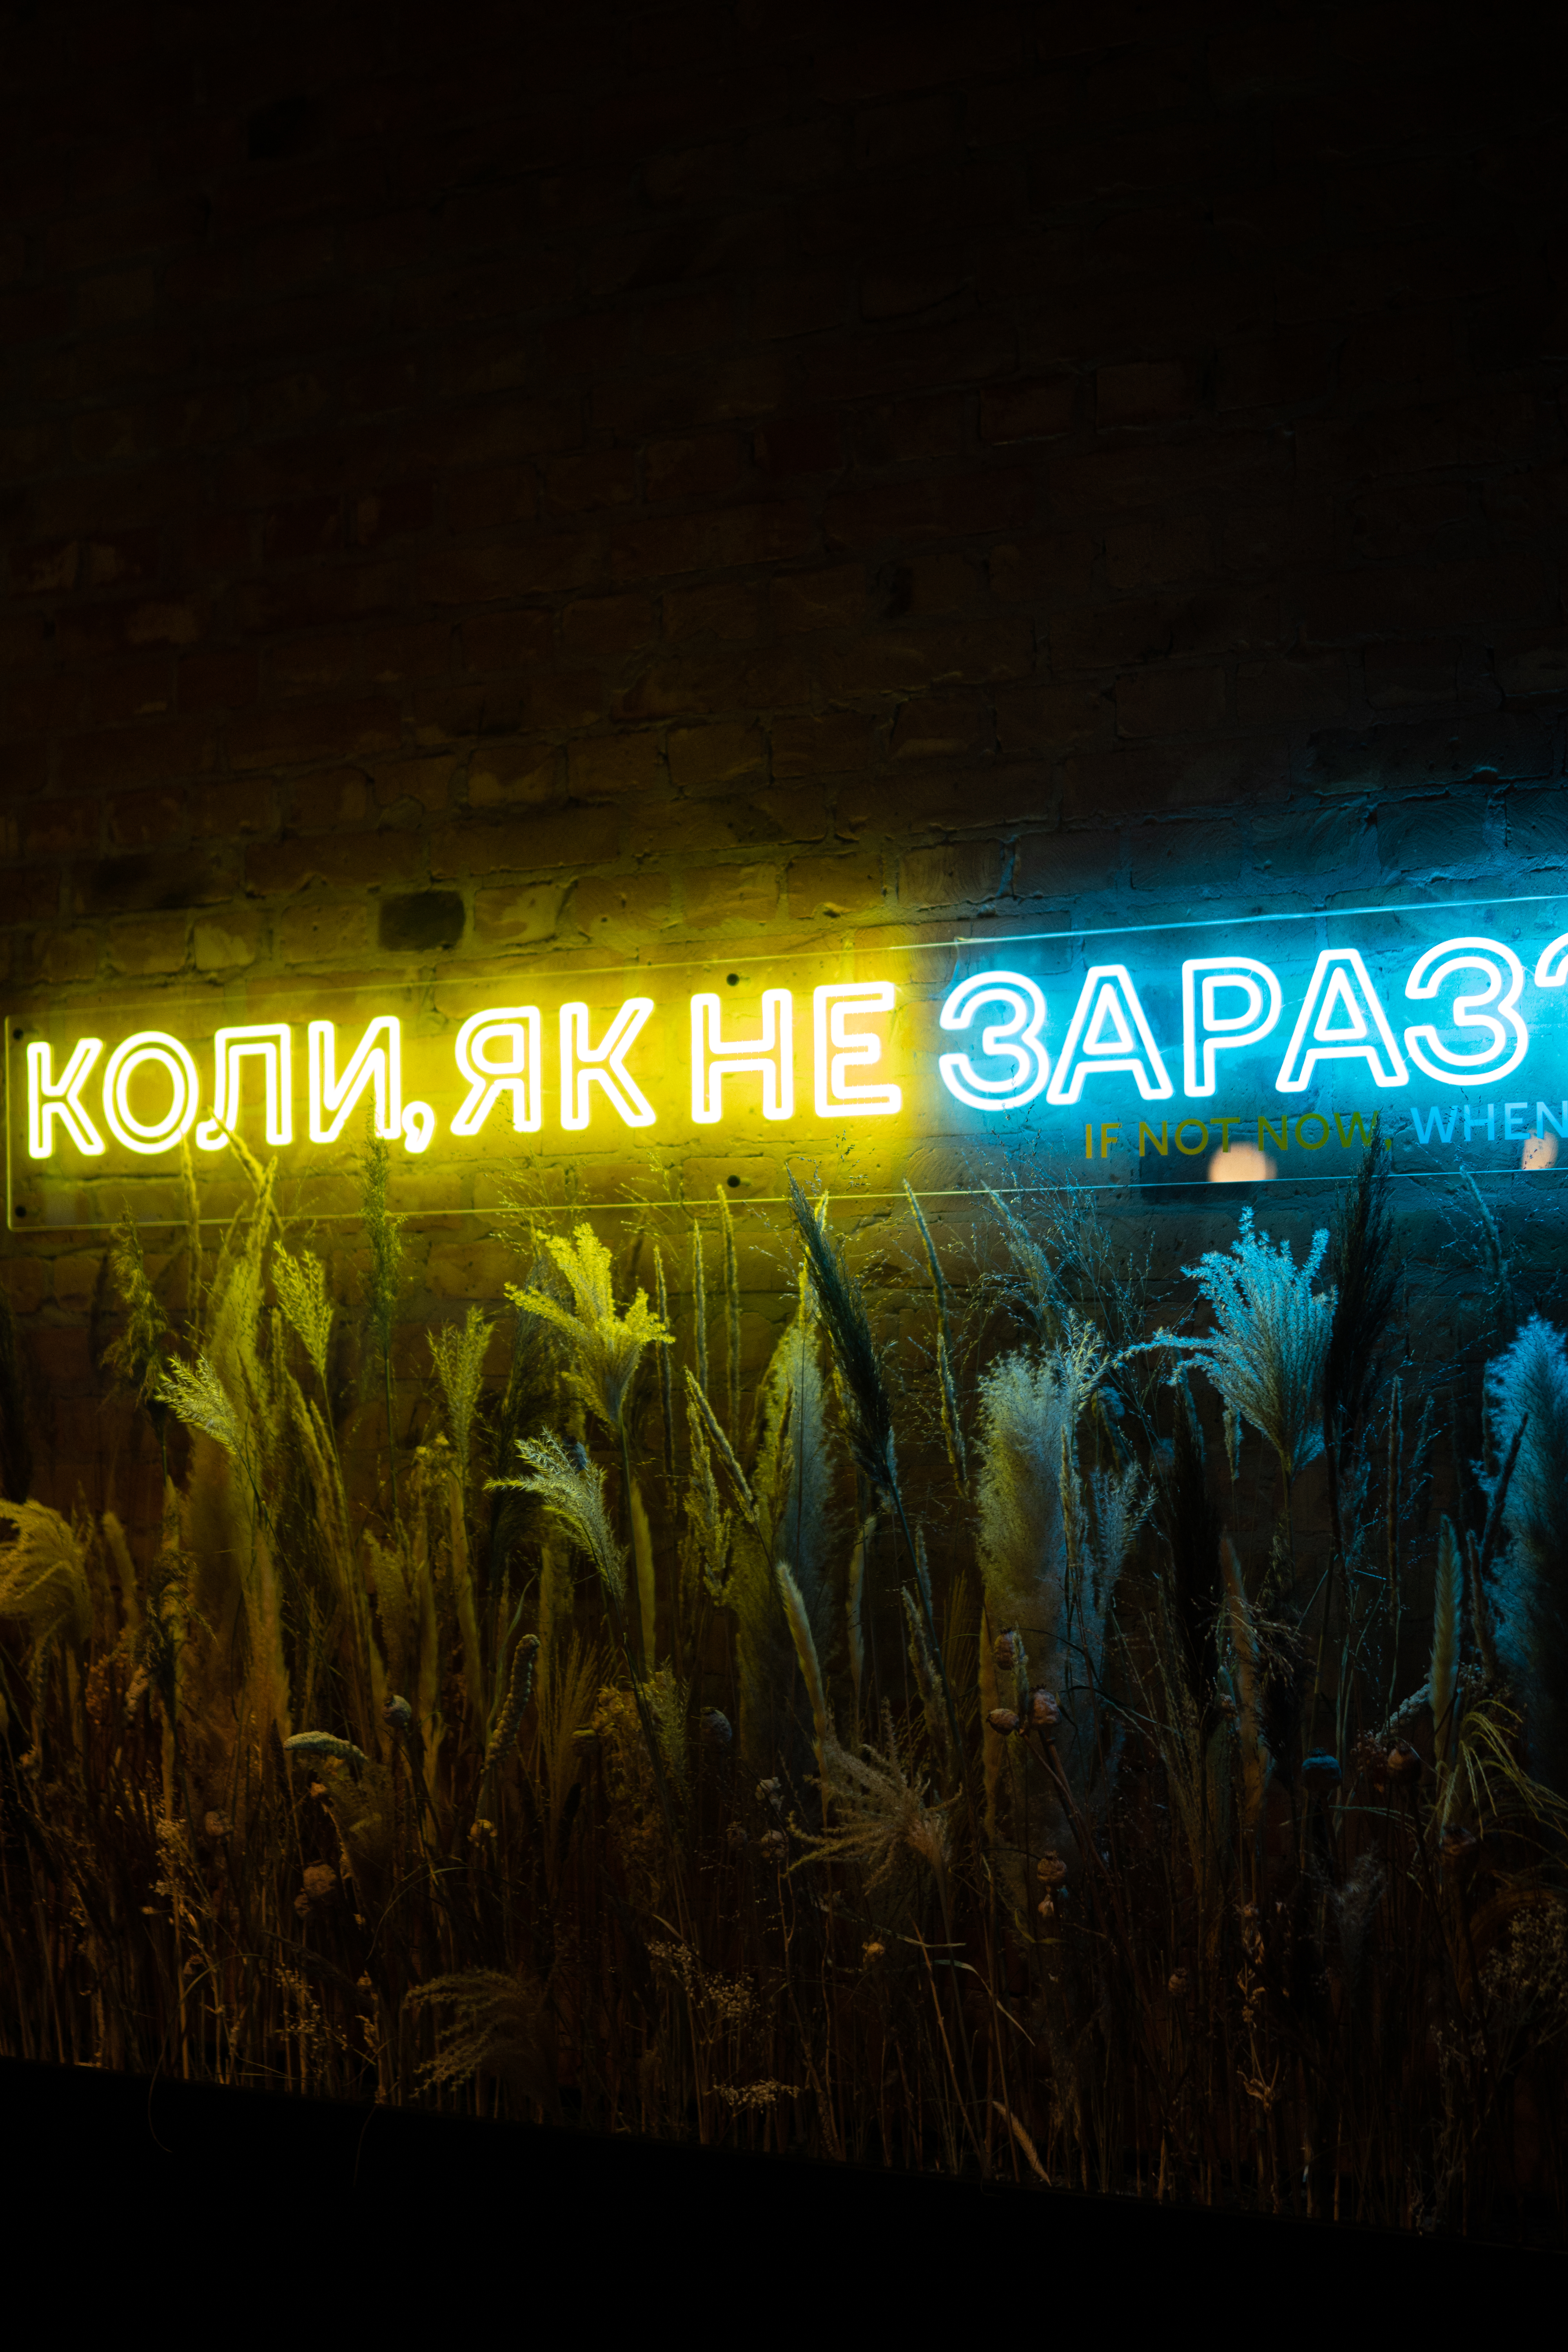 The neon sign in Ukrainian: “If not now, then when?” – the philosophy of the team